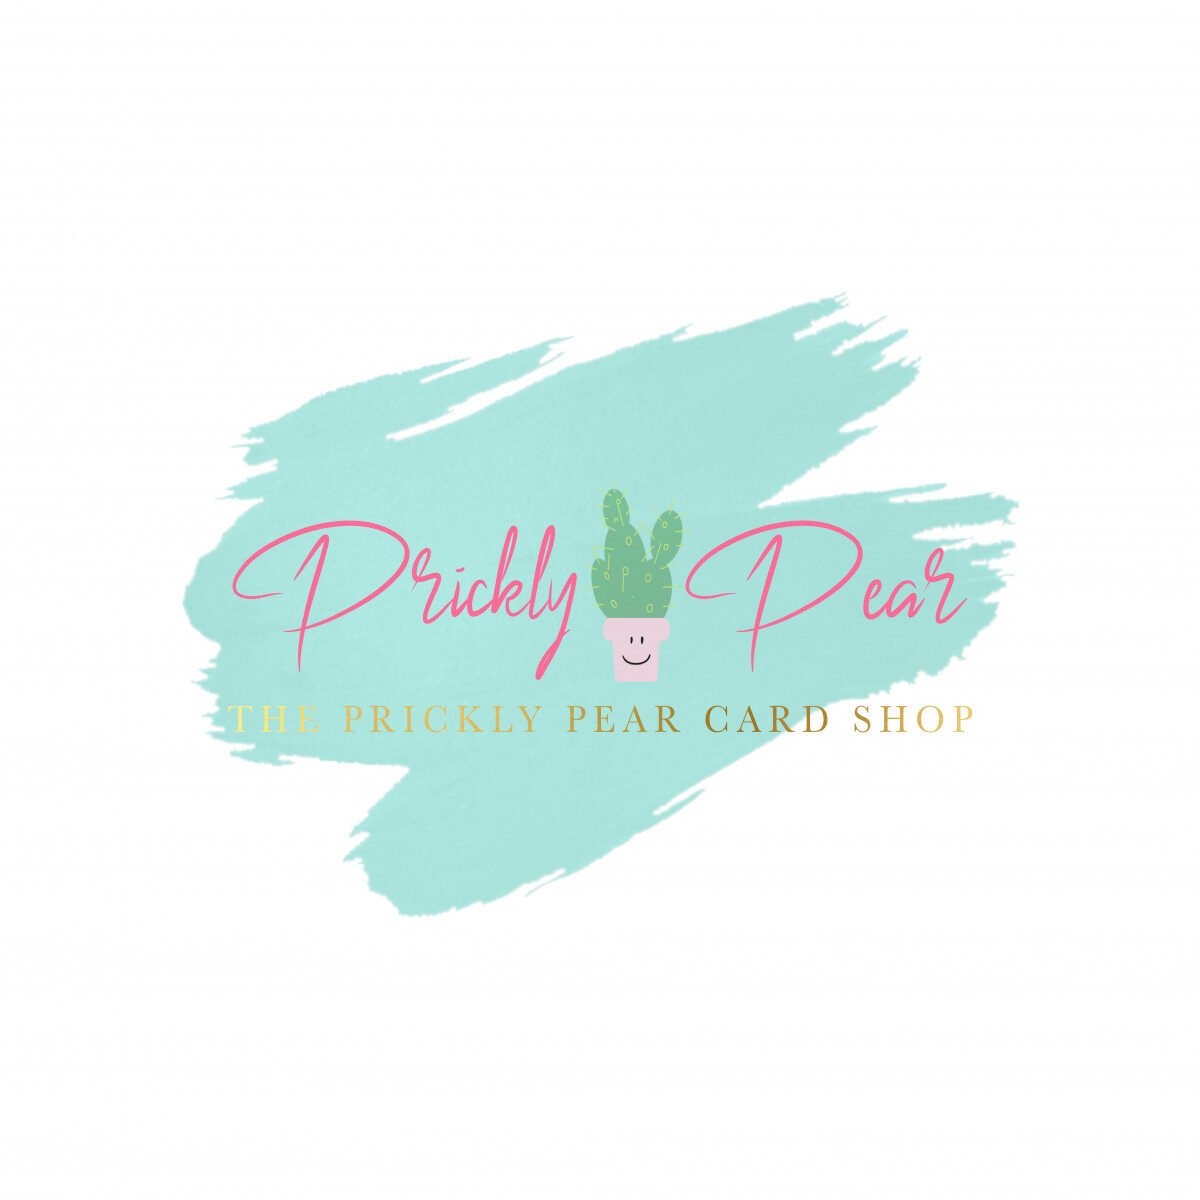 The Prickly Pear Card Shop